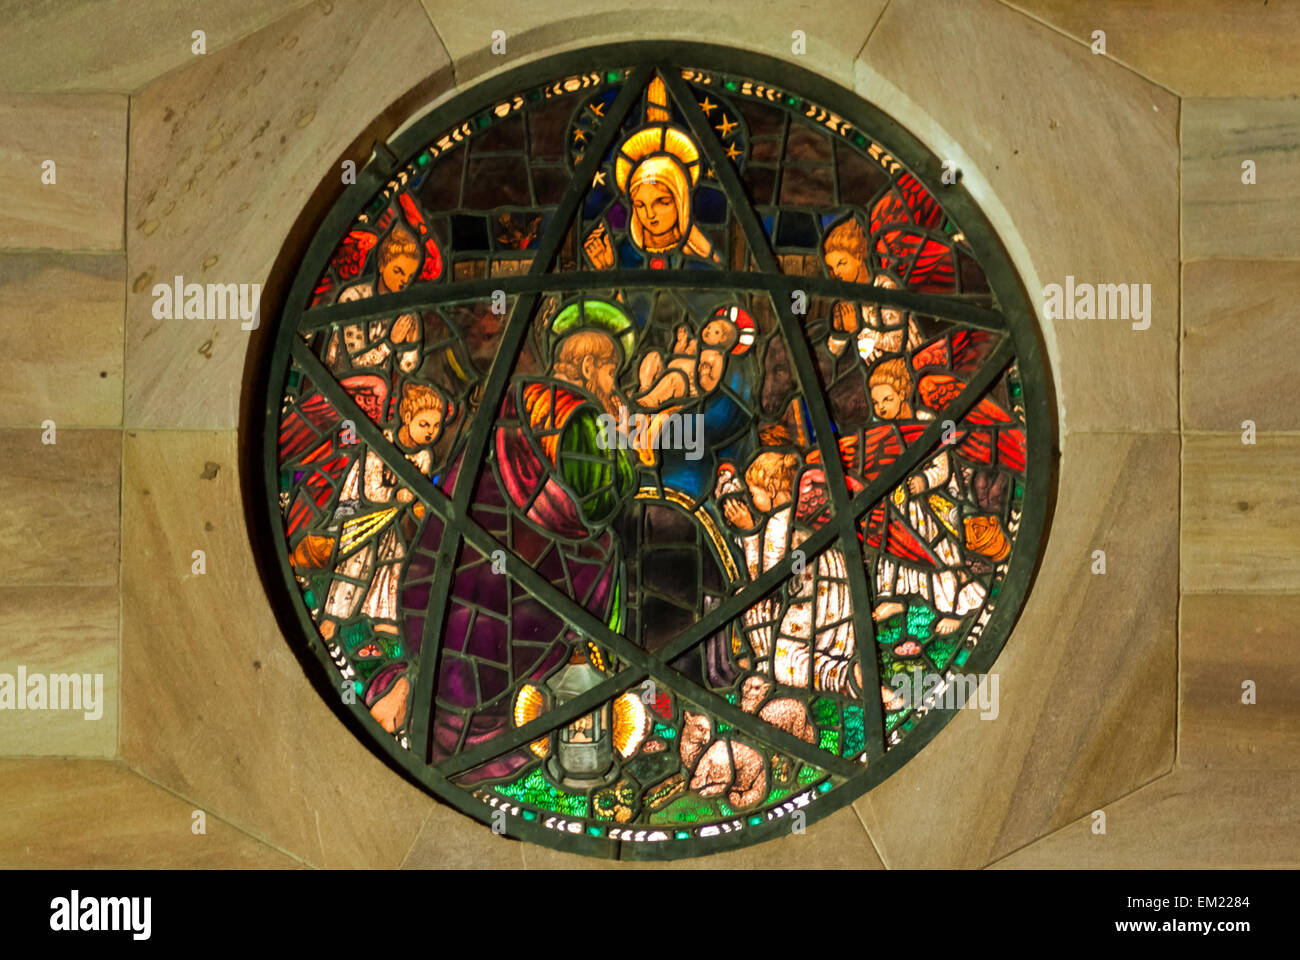 Stained Glass Window by Mabel Esplin in Republican Palace Museum, Khartoum, Sudan Stock Photo